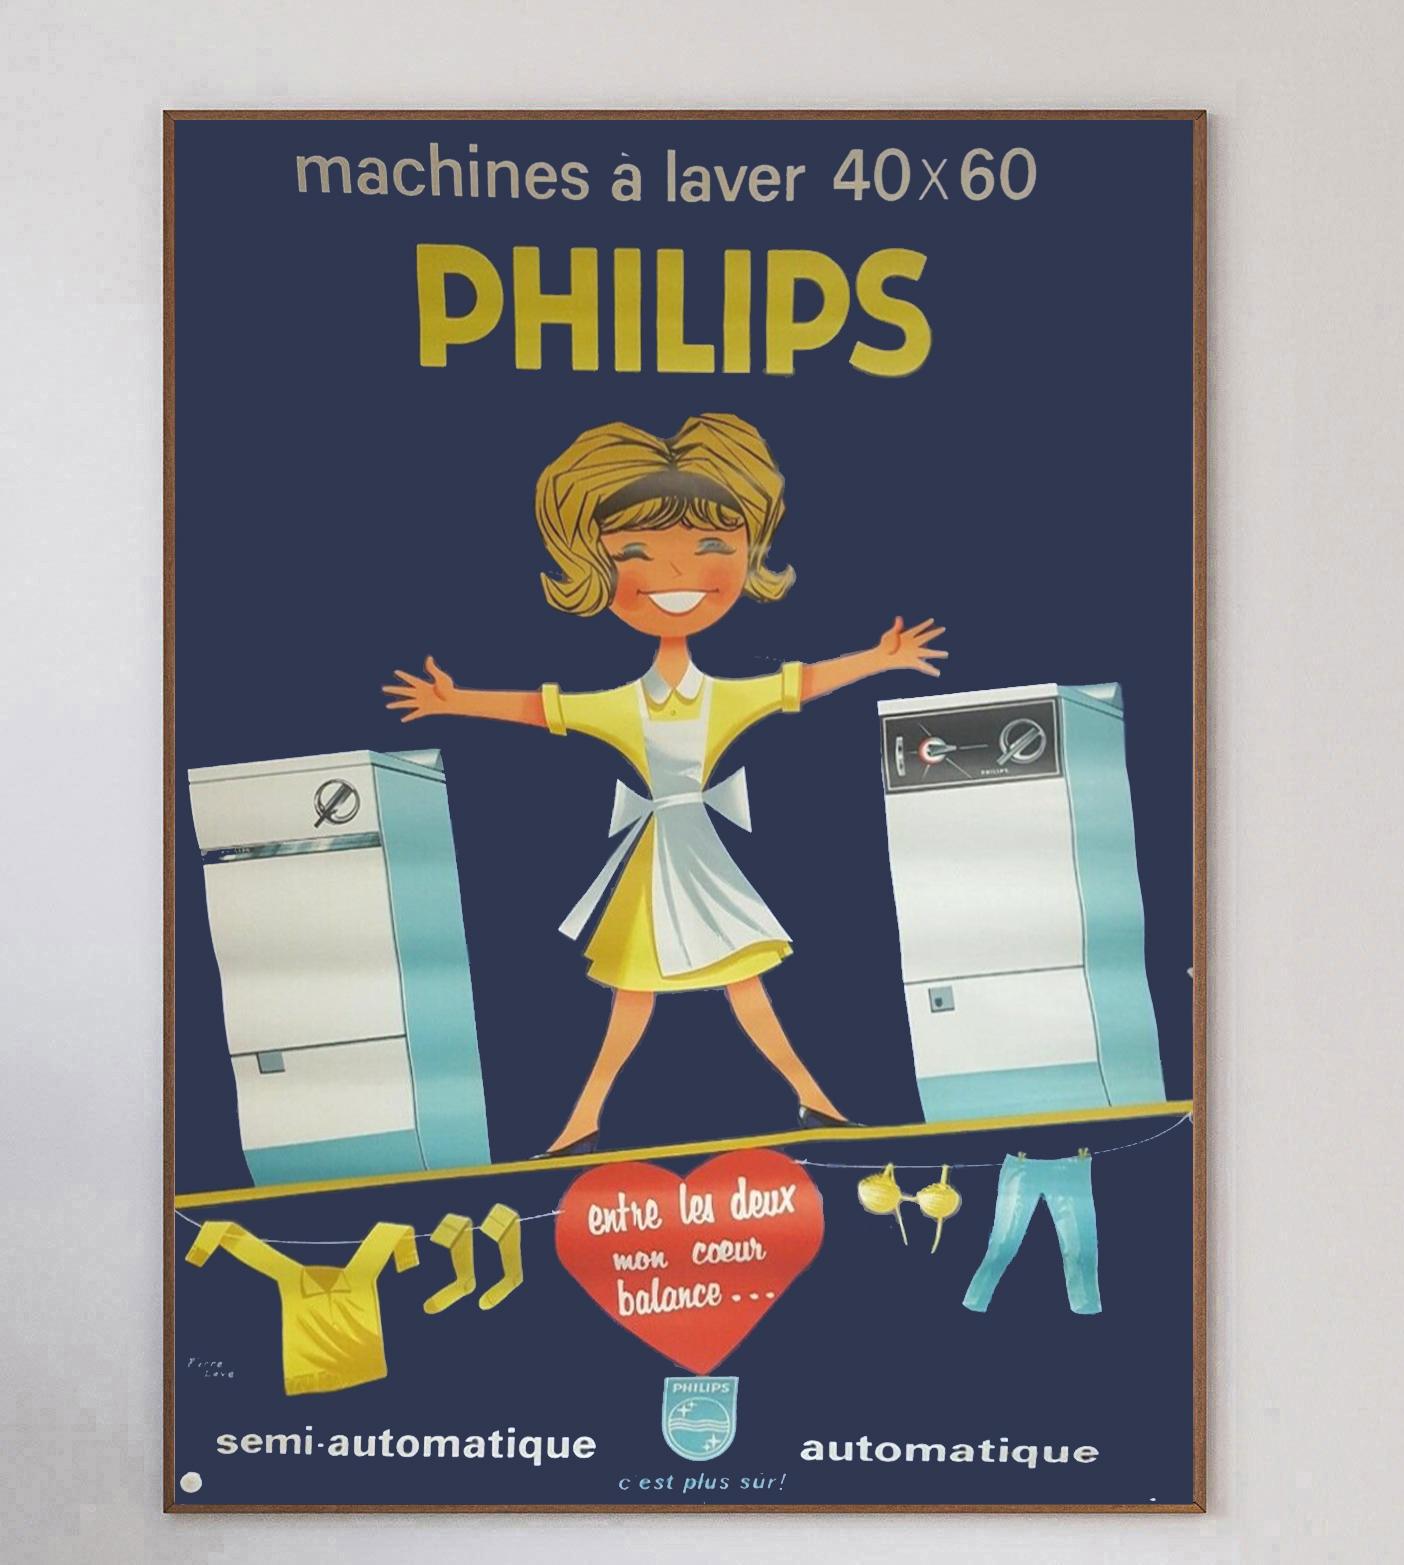 Wonderful & charming poster for Dutch electronics brand Philips. Founded in 1891, Philips was one of the biggest electronics brands in the UK and continues to trade today, focusing on health technology.

With artwork from Pierre Leve, this